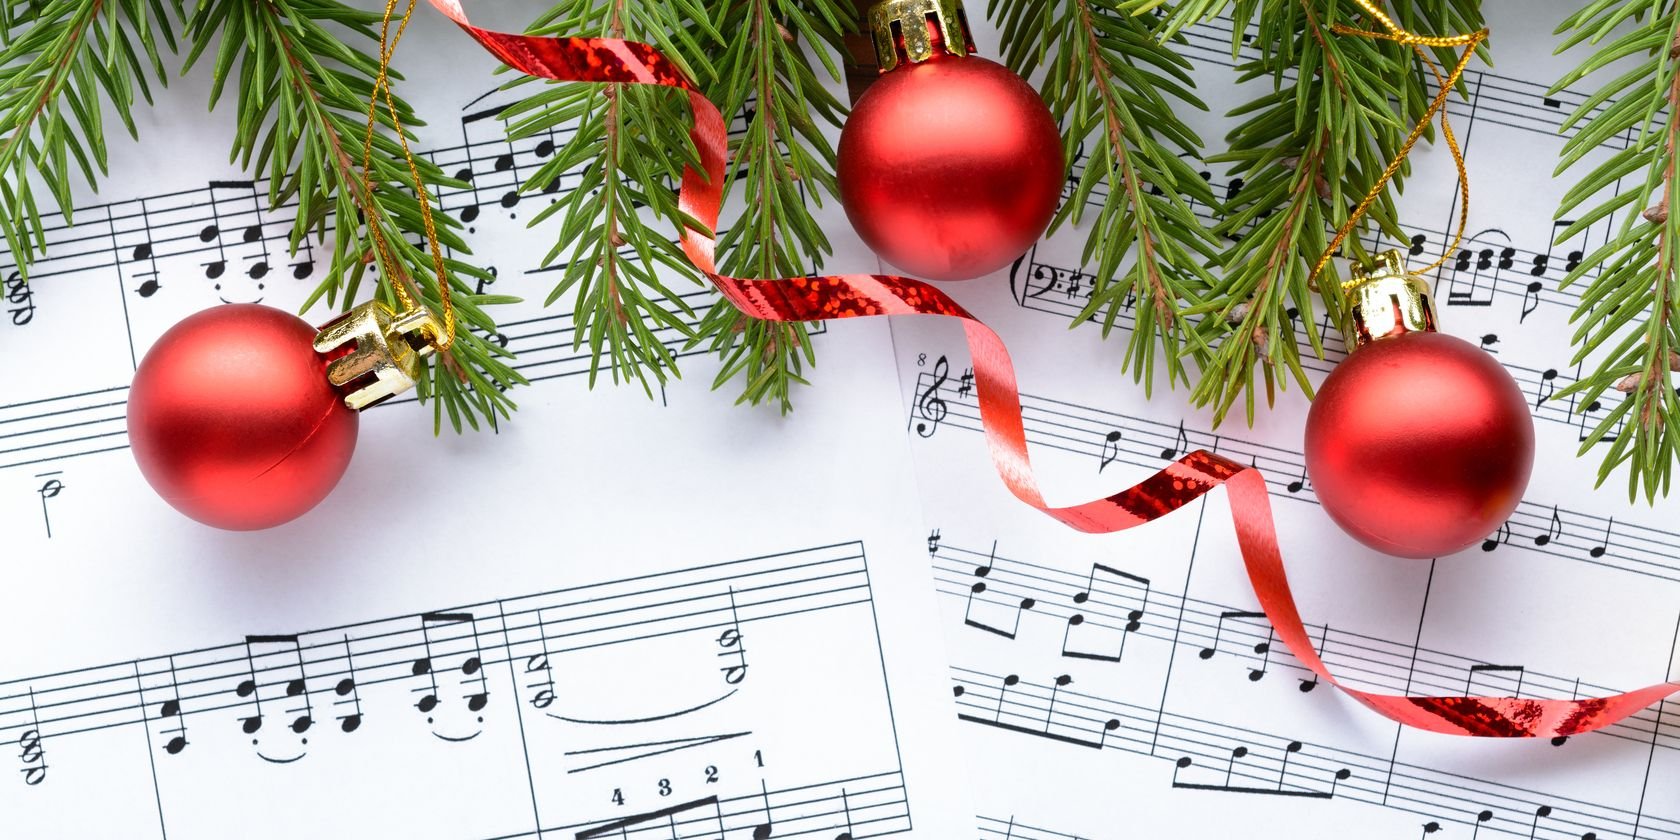 6 Free Christmas Music and Radio Apps for Android